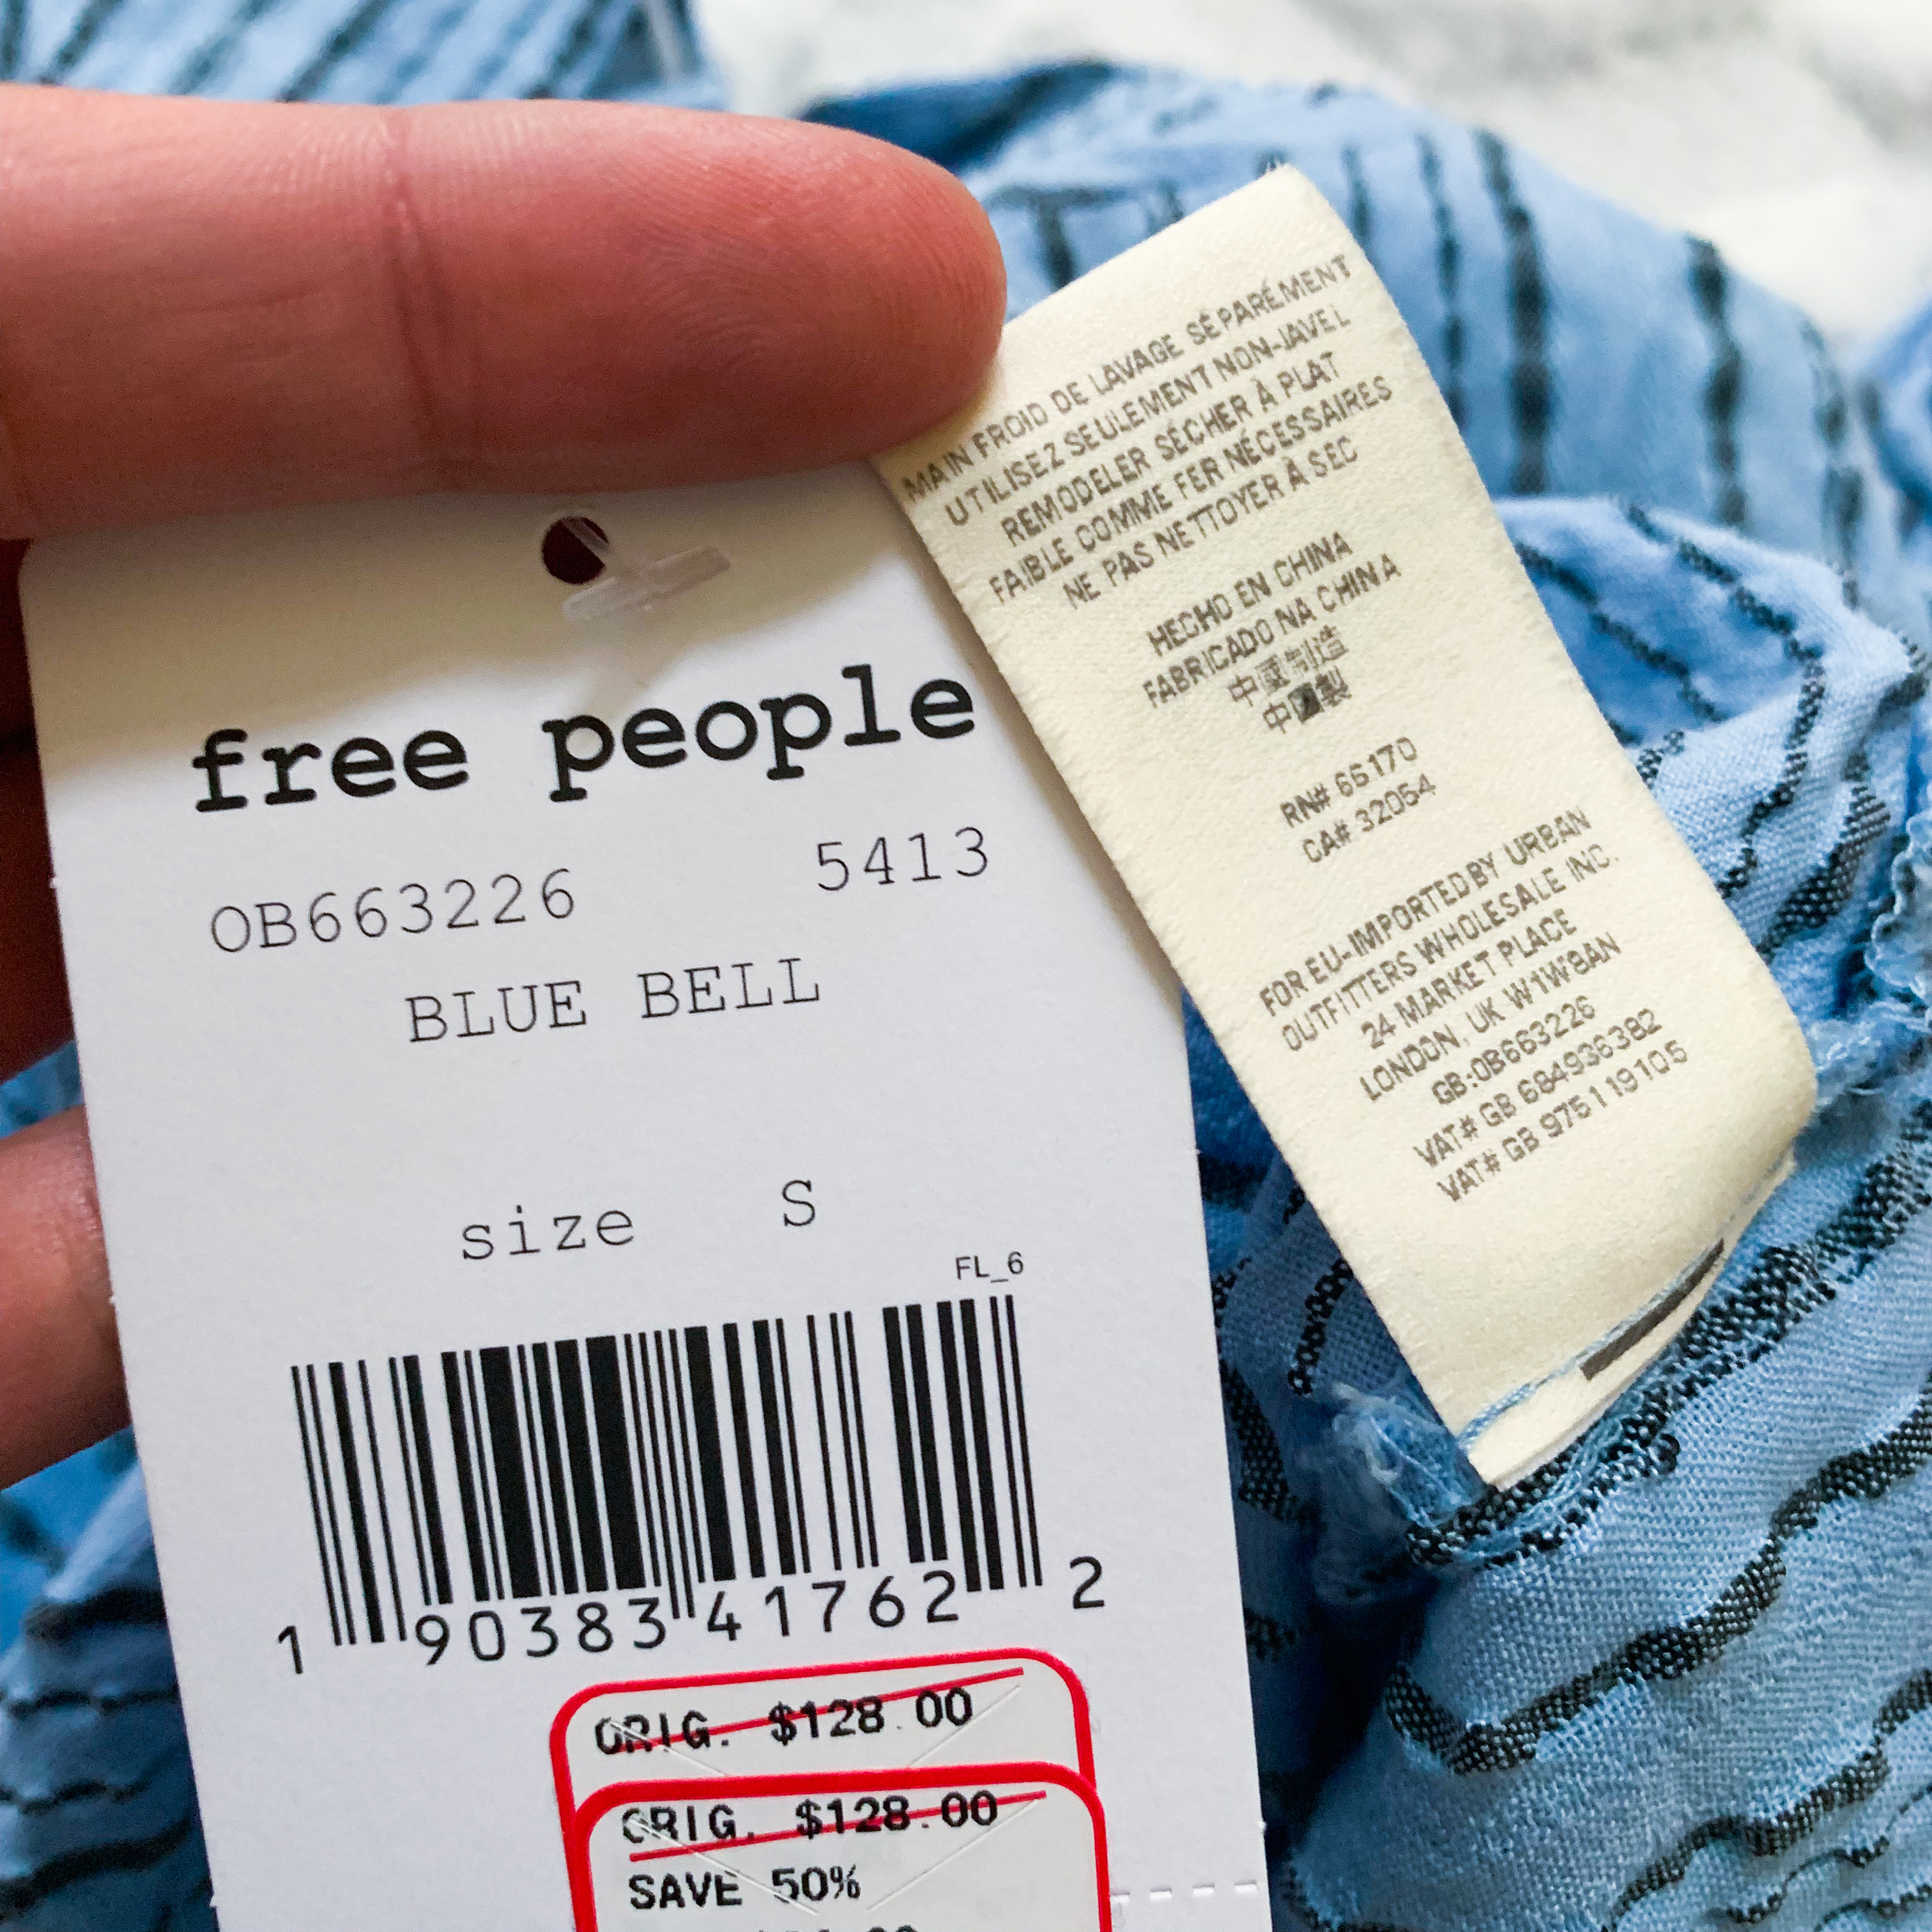 How to Find Free People Item Numbers in A Minute or Less